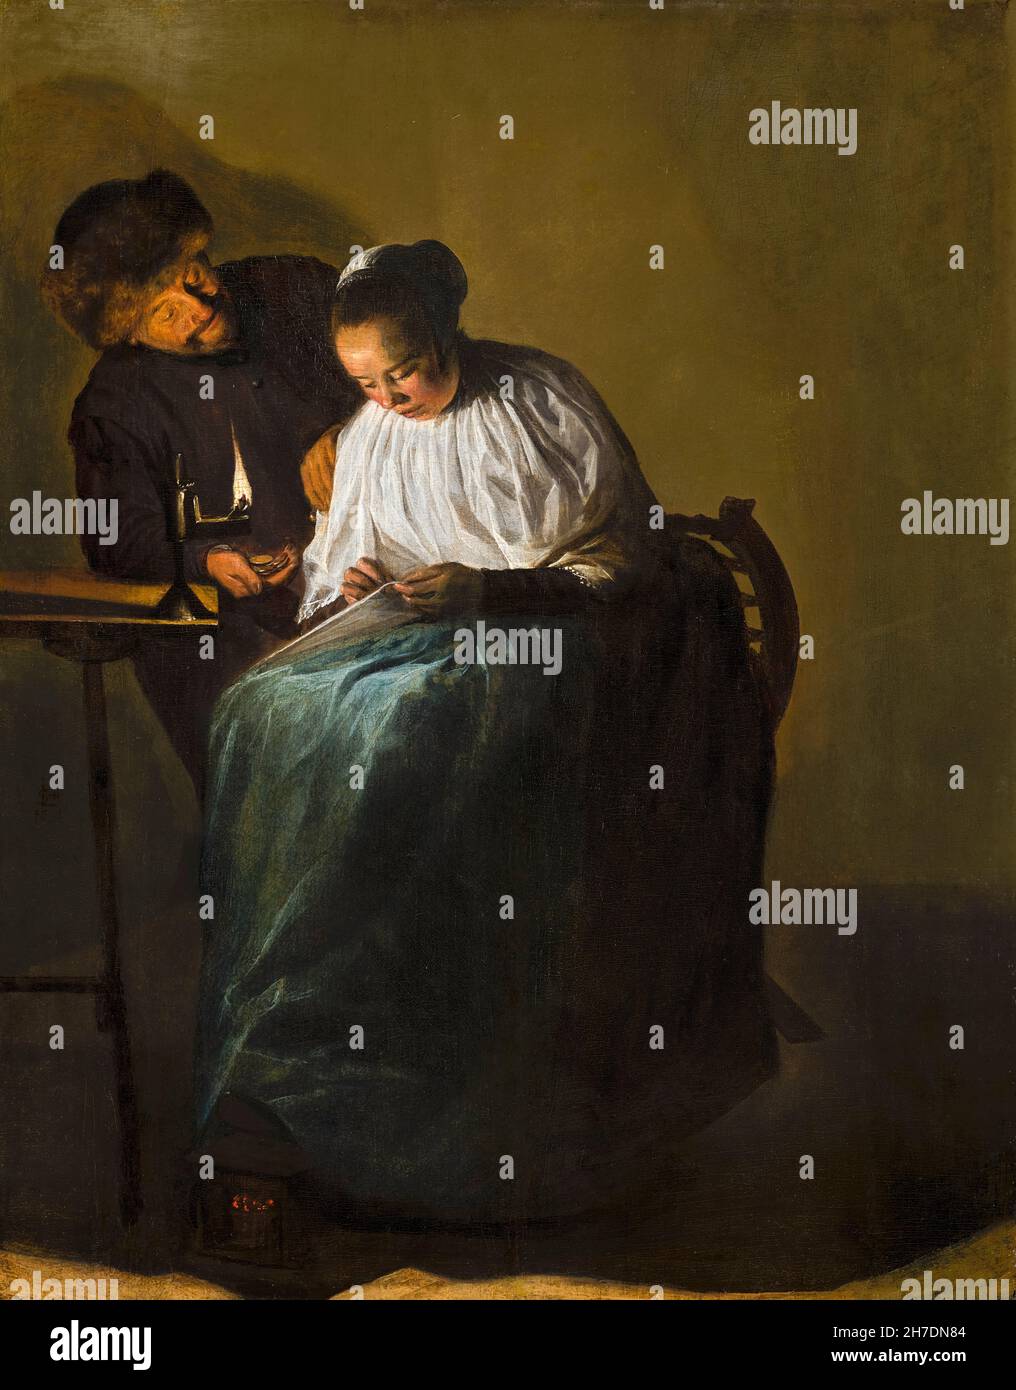 Man Offering Money to a Young Woman, painting by Judith Leyster, 1631 Stock Photo